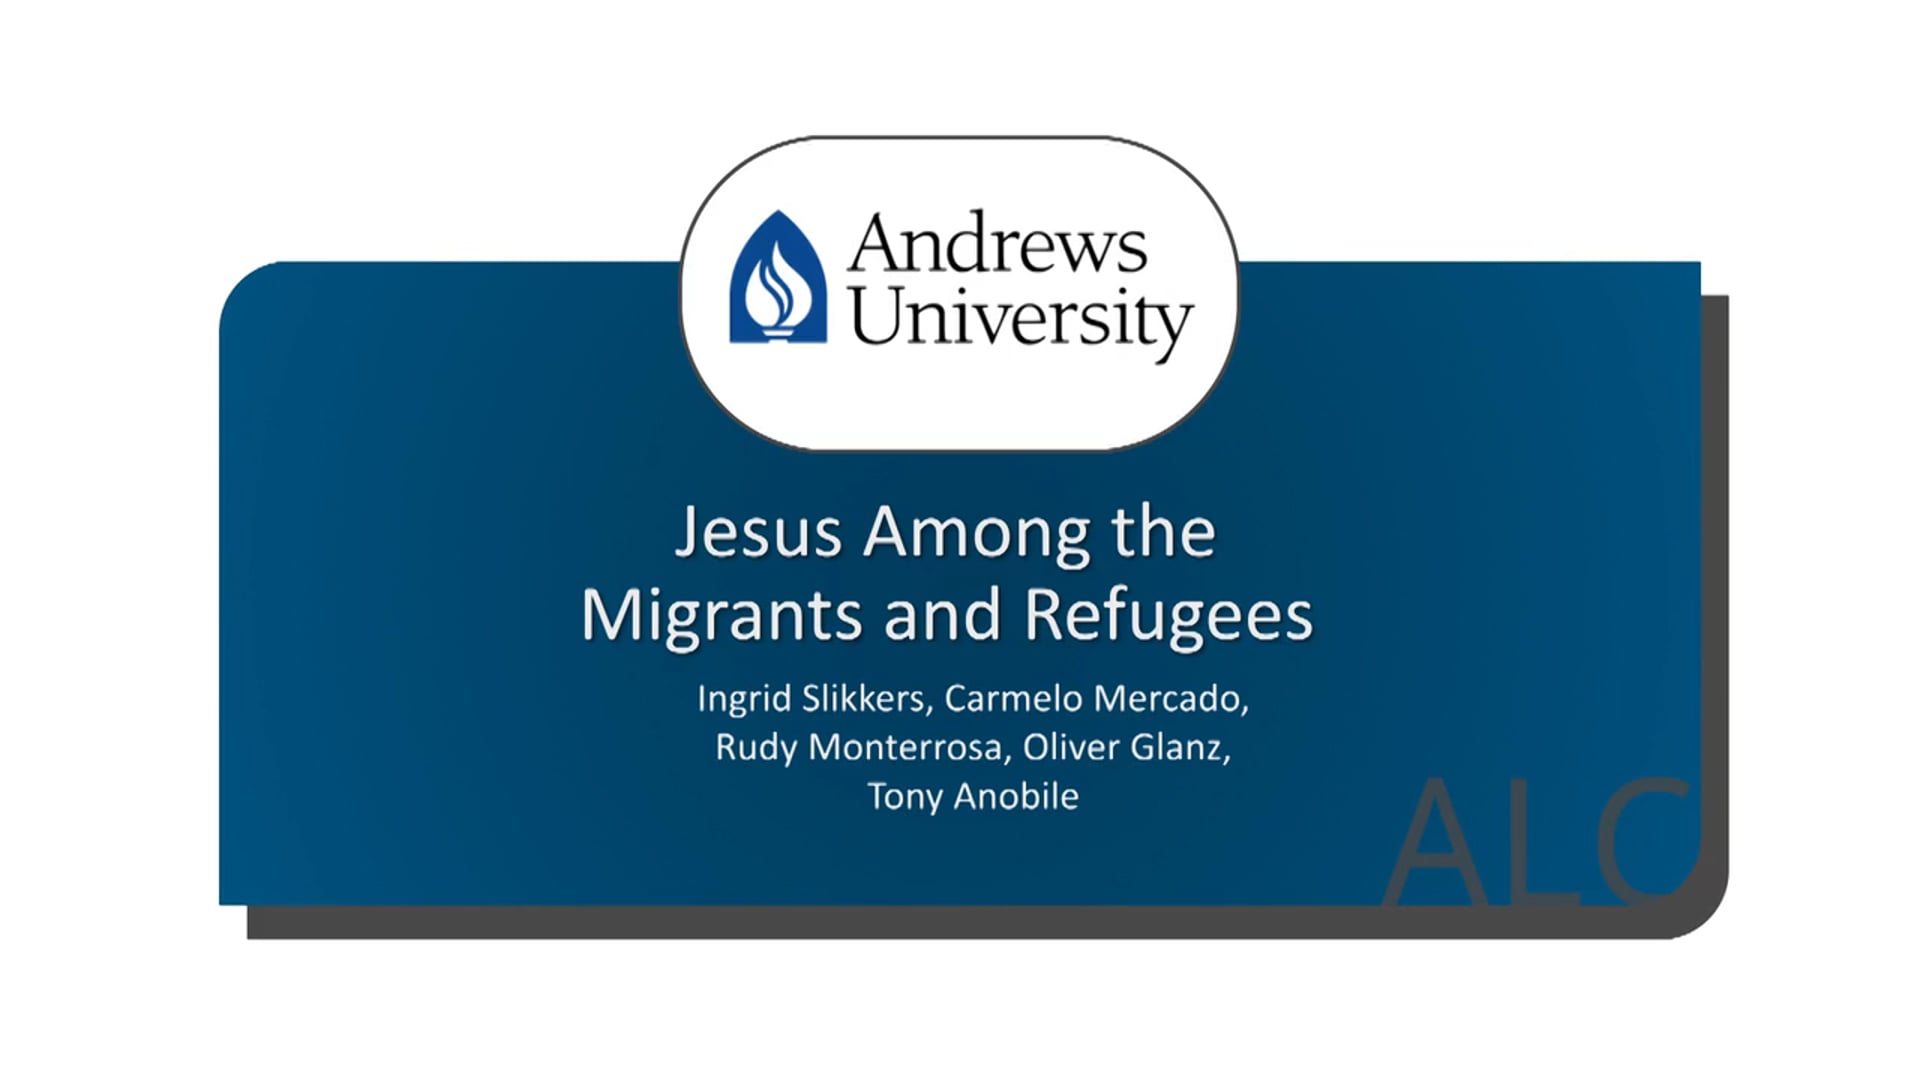 Jesus Among the Migrant and Refugees - Part 1